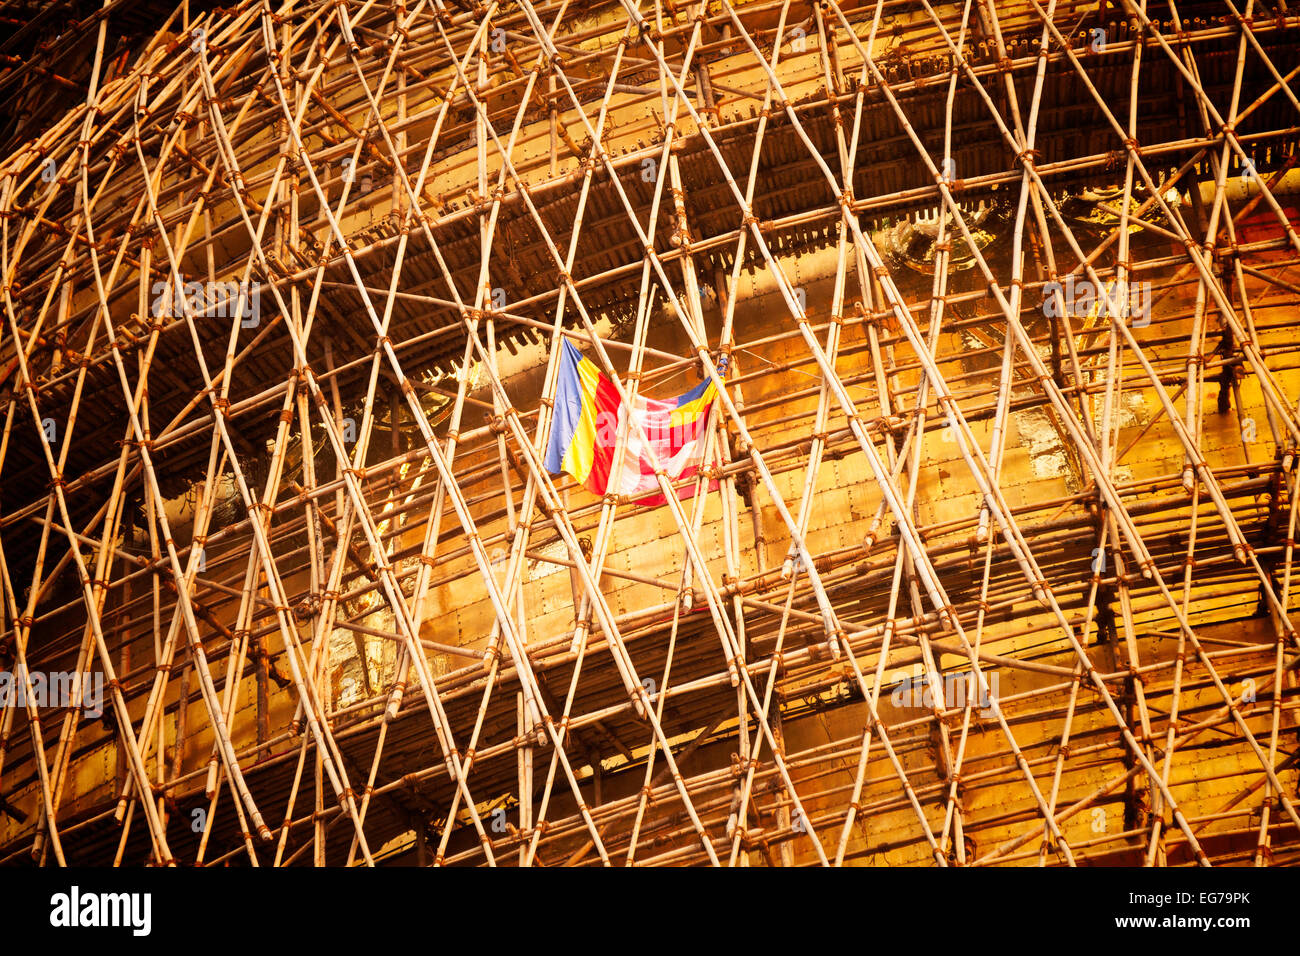 The buddhist flag flying in the bamboo scaffolding on the Shwedagon Pagoda during re-laying of the gold leaf, Yangon, Myanmar Stock Photo